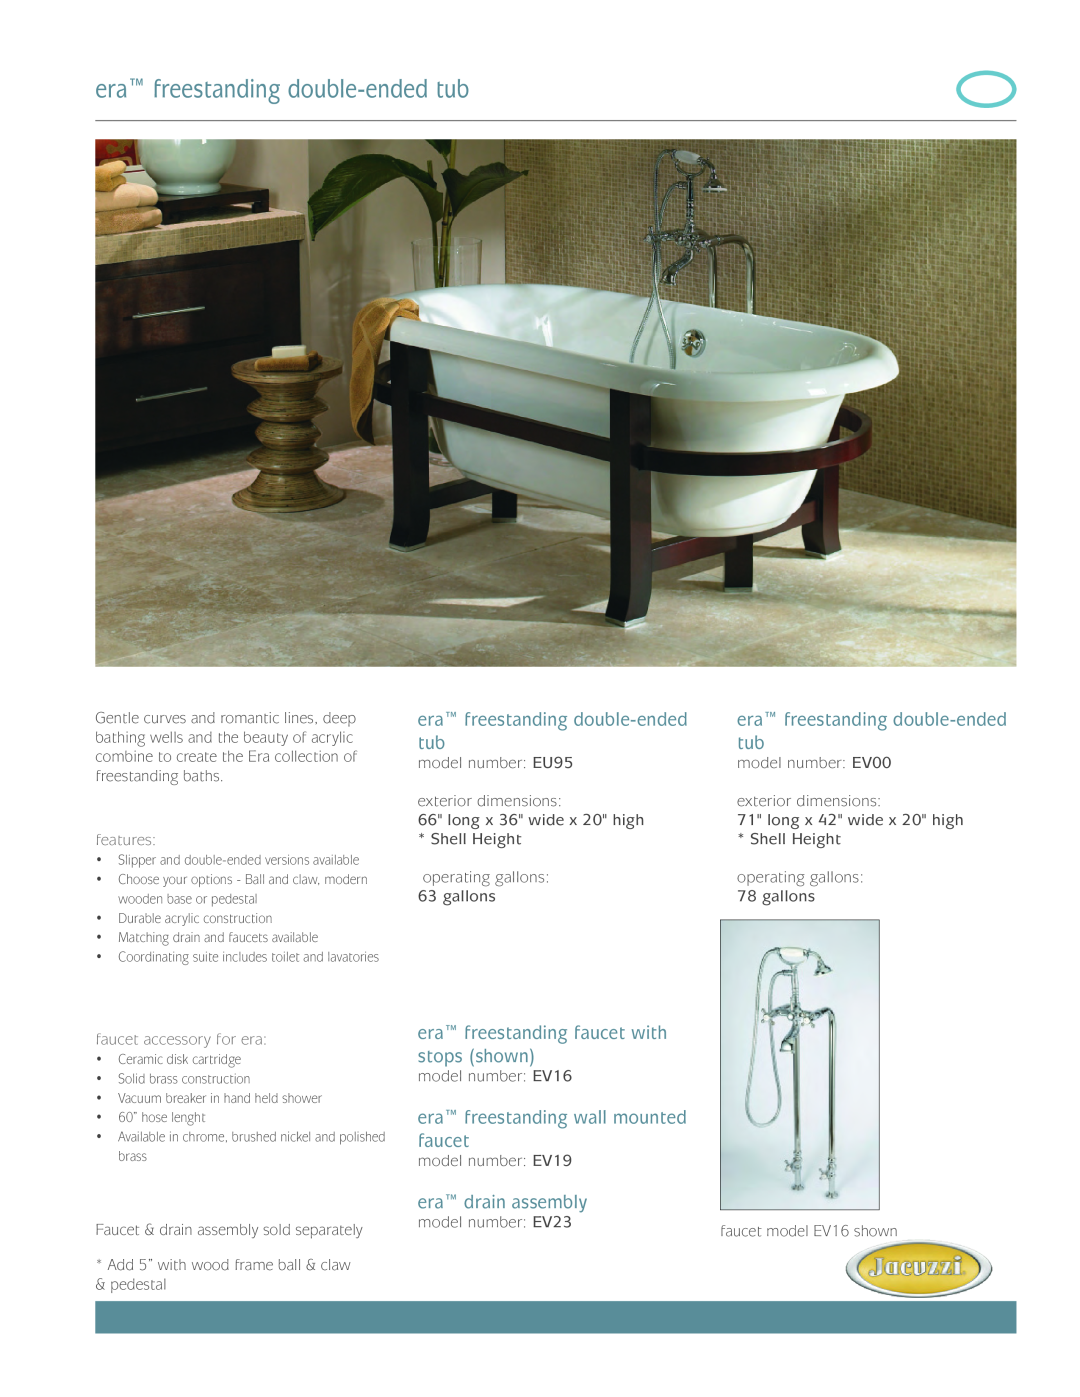 Jacuzzi EU95 dimensions era freestanding double-ended tub, era freestanding faucet with stops shown, era drain assembly 